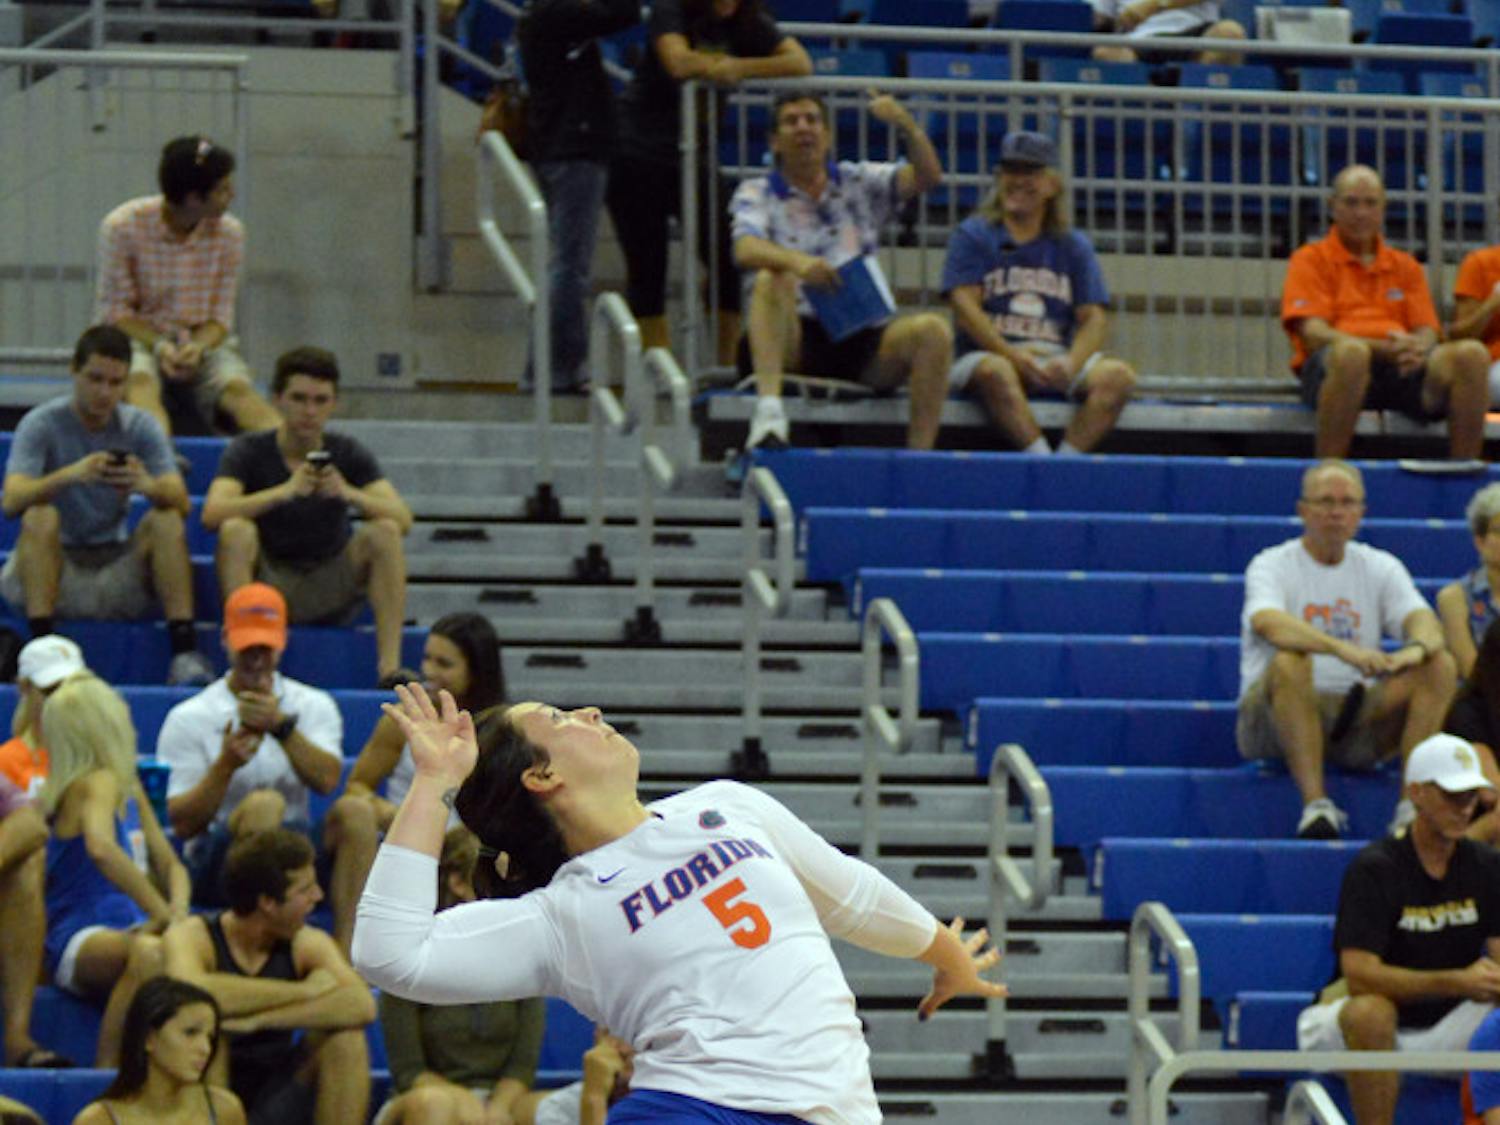 Taylor Unroe jumps to serve the ball during Florida's 3-0 win against Georgia Southern on Friday in the O'Connell Center.